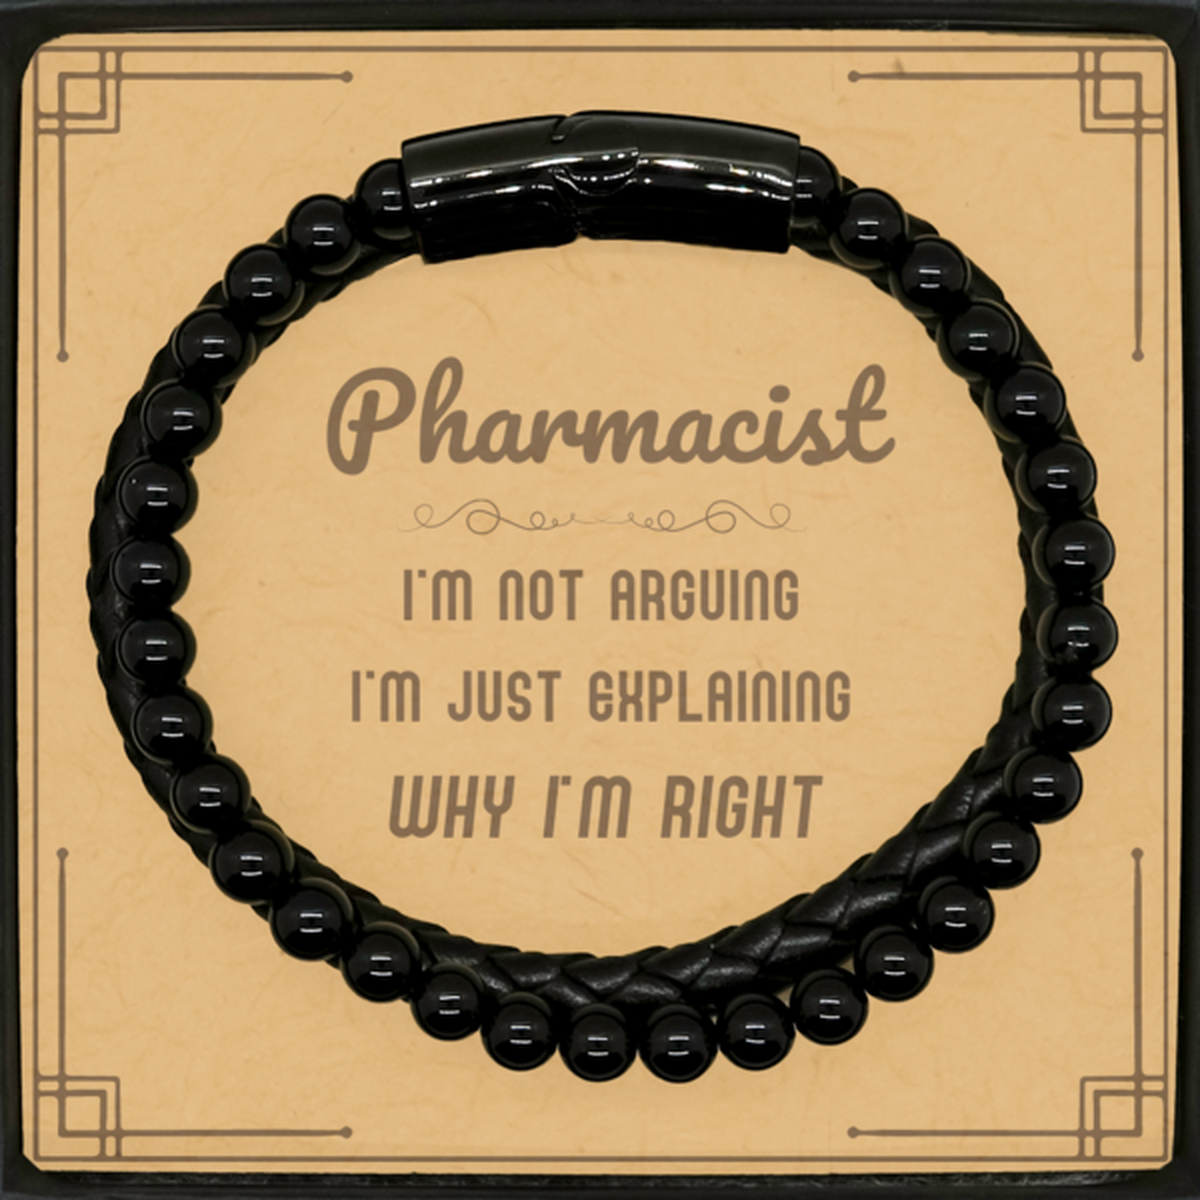 Pharmacist I'm not Arguing. I'm Just Explaining Why I'm RIGHT Stone Leather Bracelets, Funny Saying Quote Pharmacist Gifts For Pharmacist Message Card Graduation Birthday Christmas Gifts for Men Women Coworker